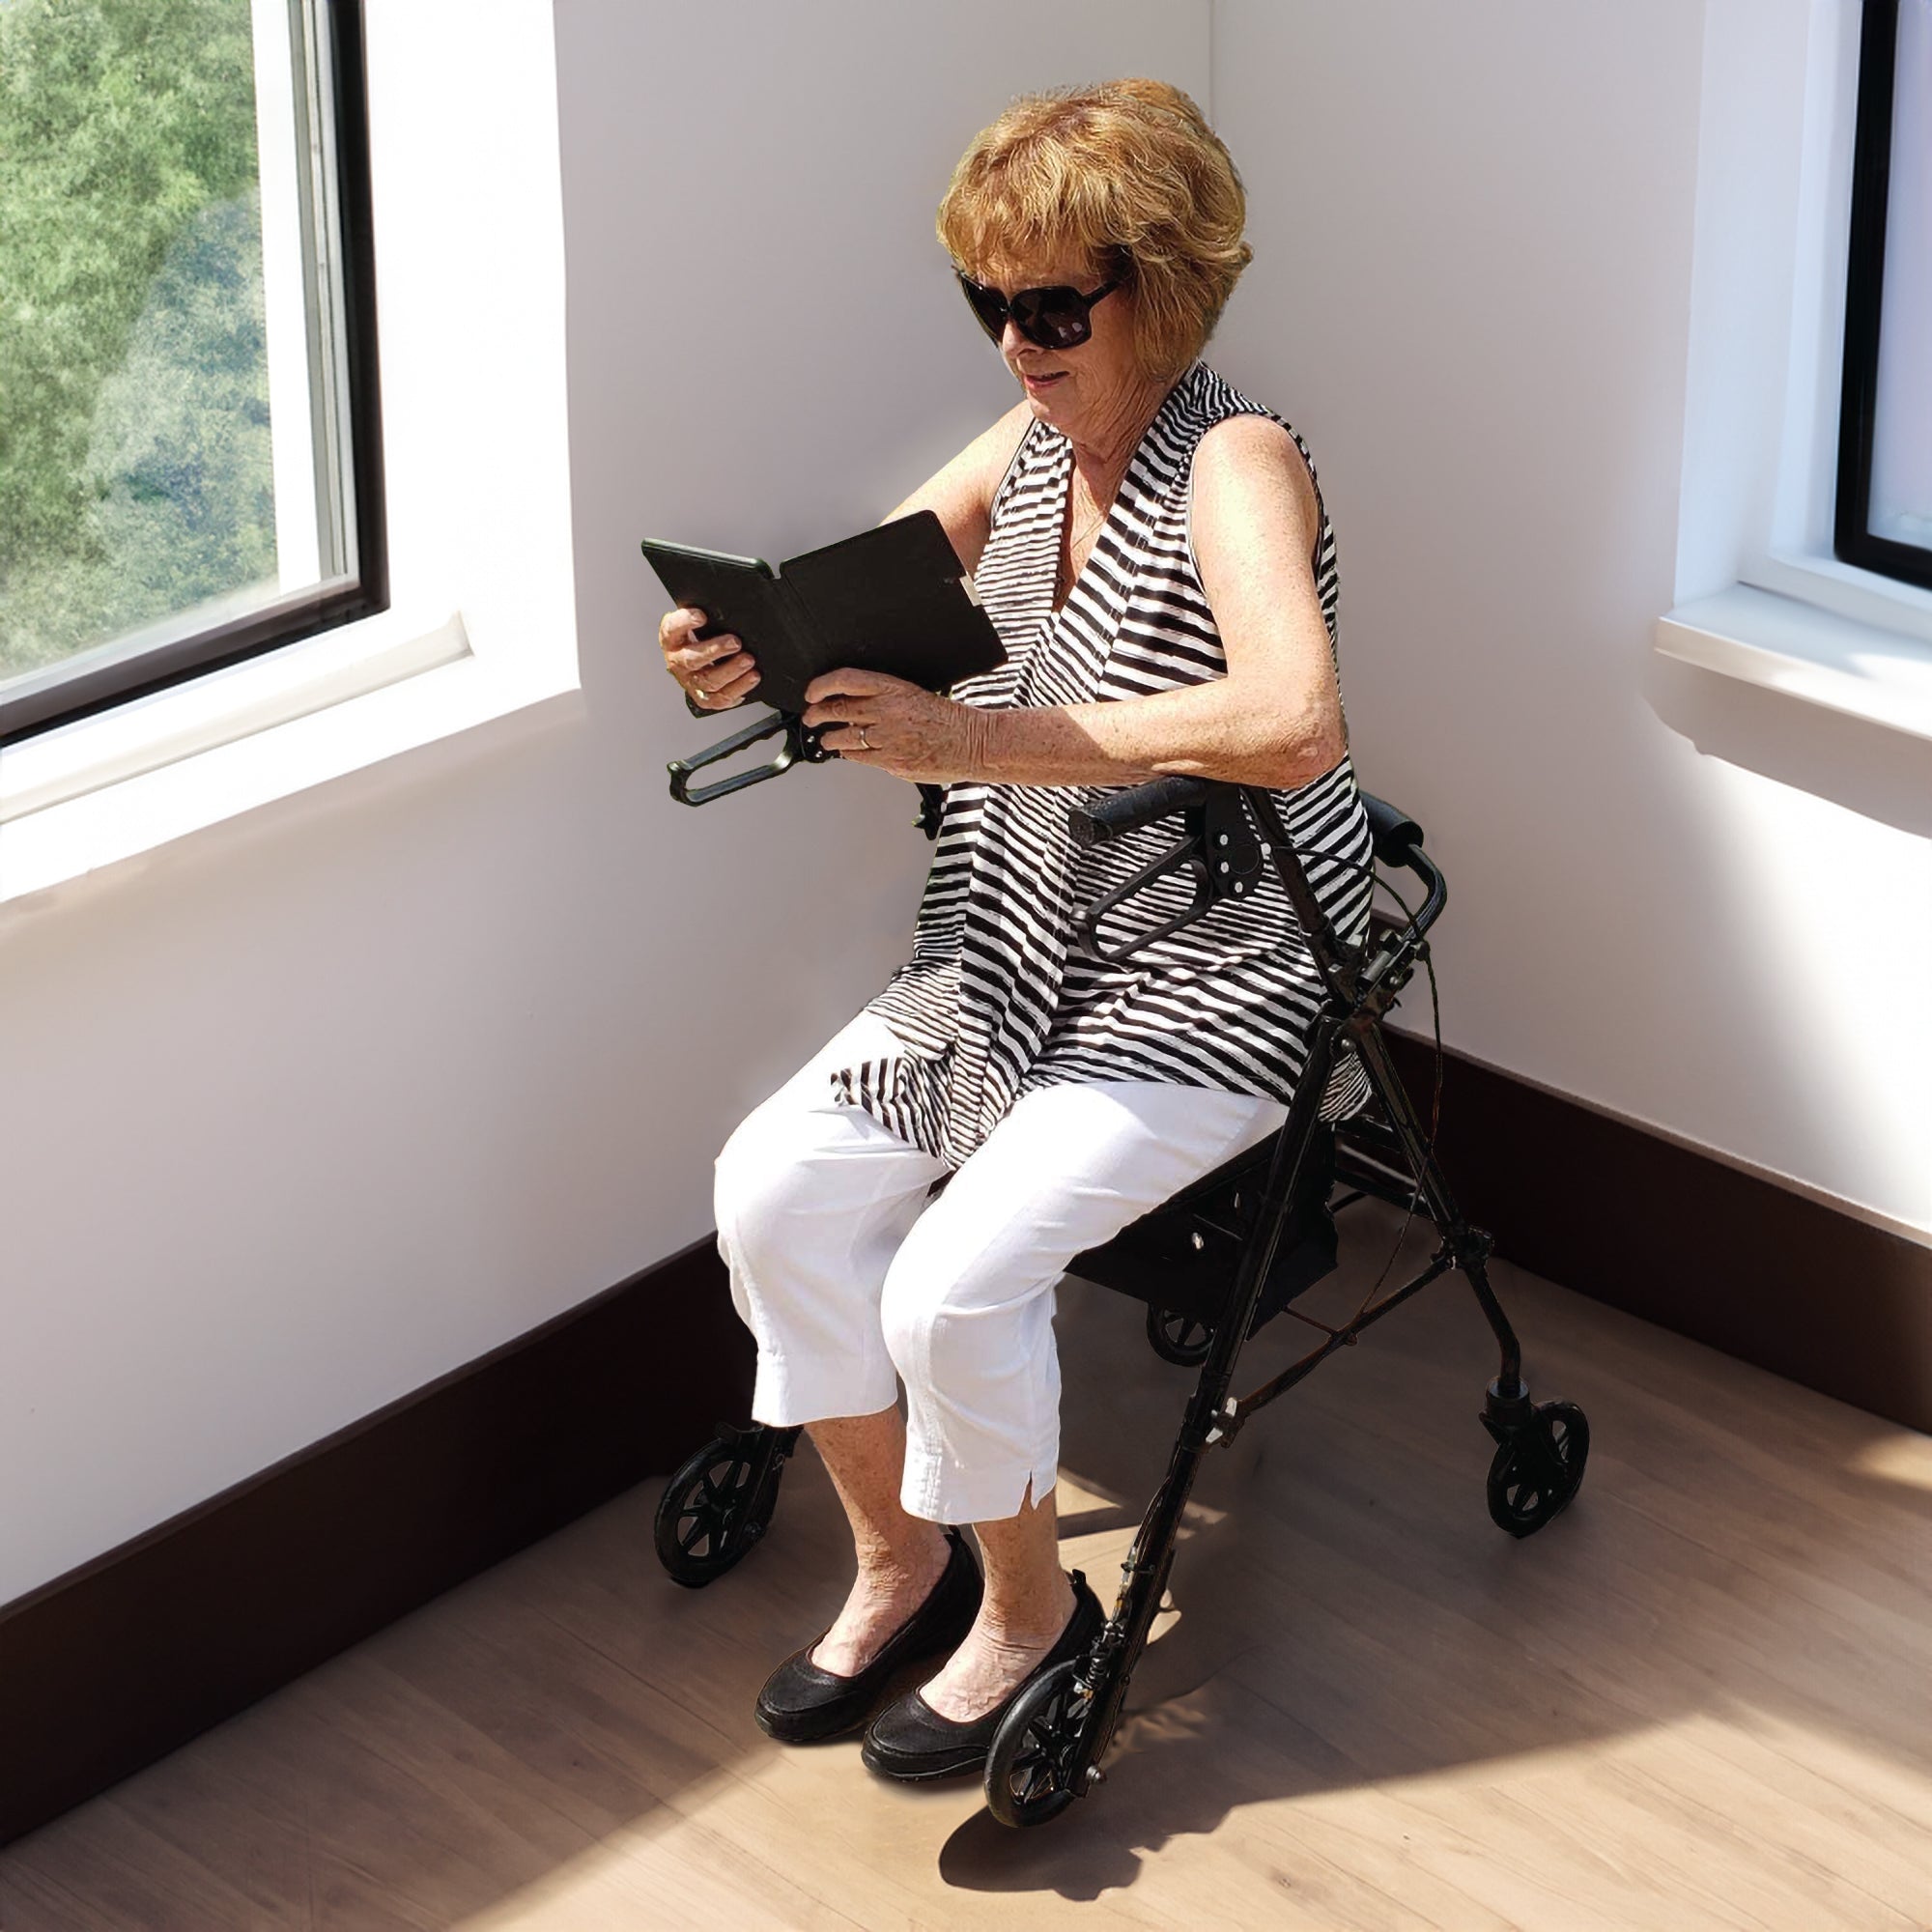 An elderly woman sitting on a rollator reading a tablet